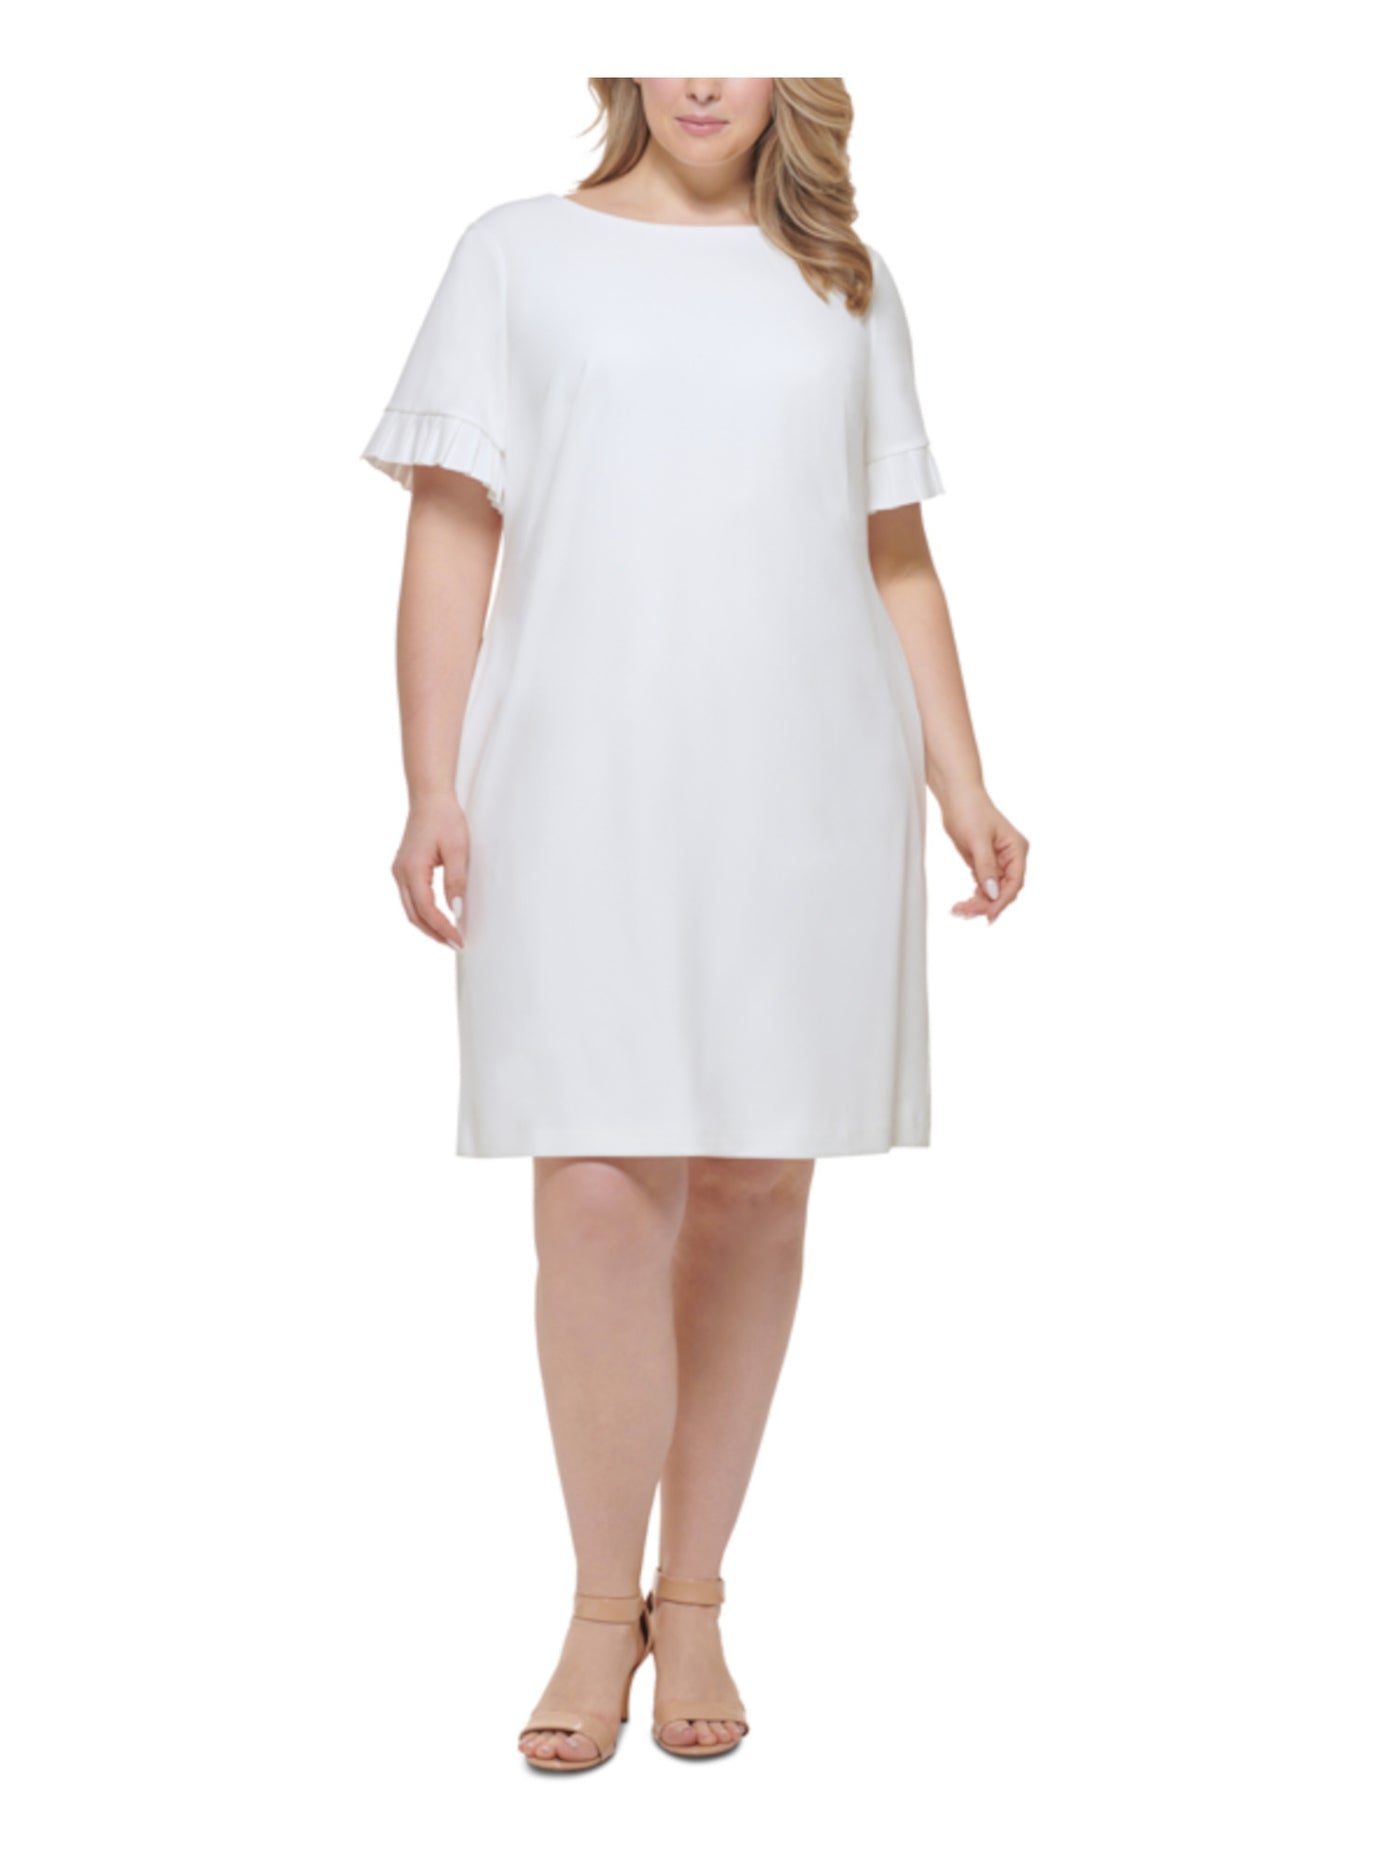 TOMMY HILFIGER Womens Ivory Stretch Zippered Ruffled Scuba Crepe Lined Short Sleeve Round Neck Knee Length Wear To Work Shift Dress Plus 22W